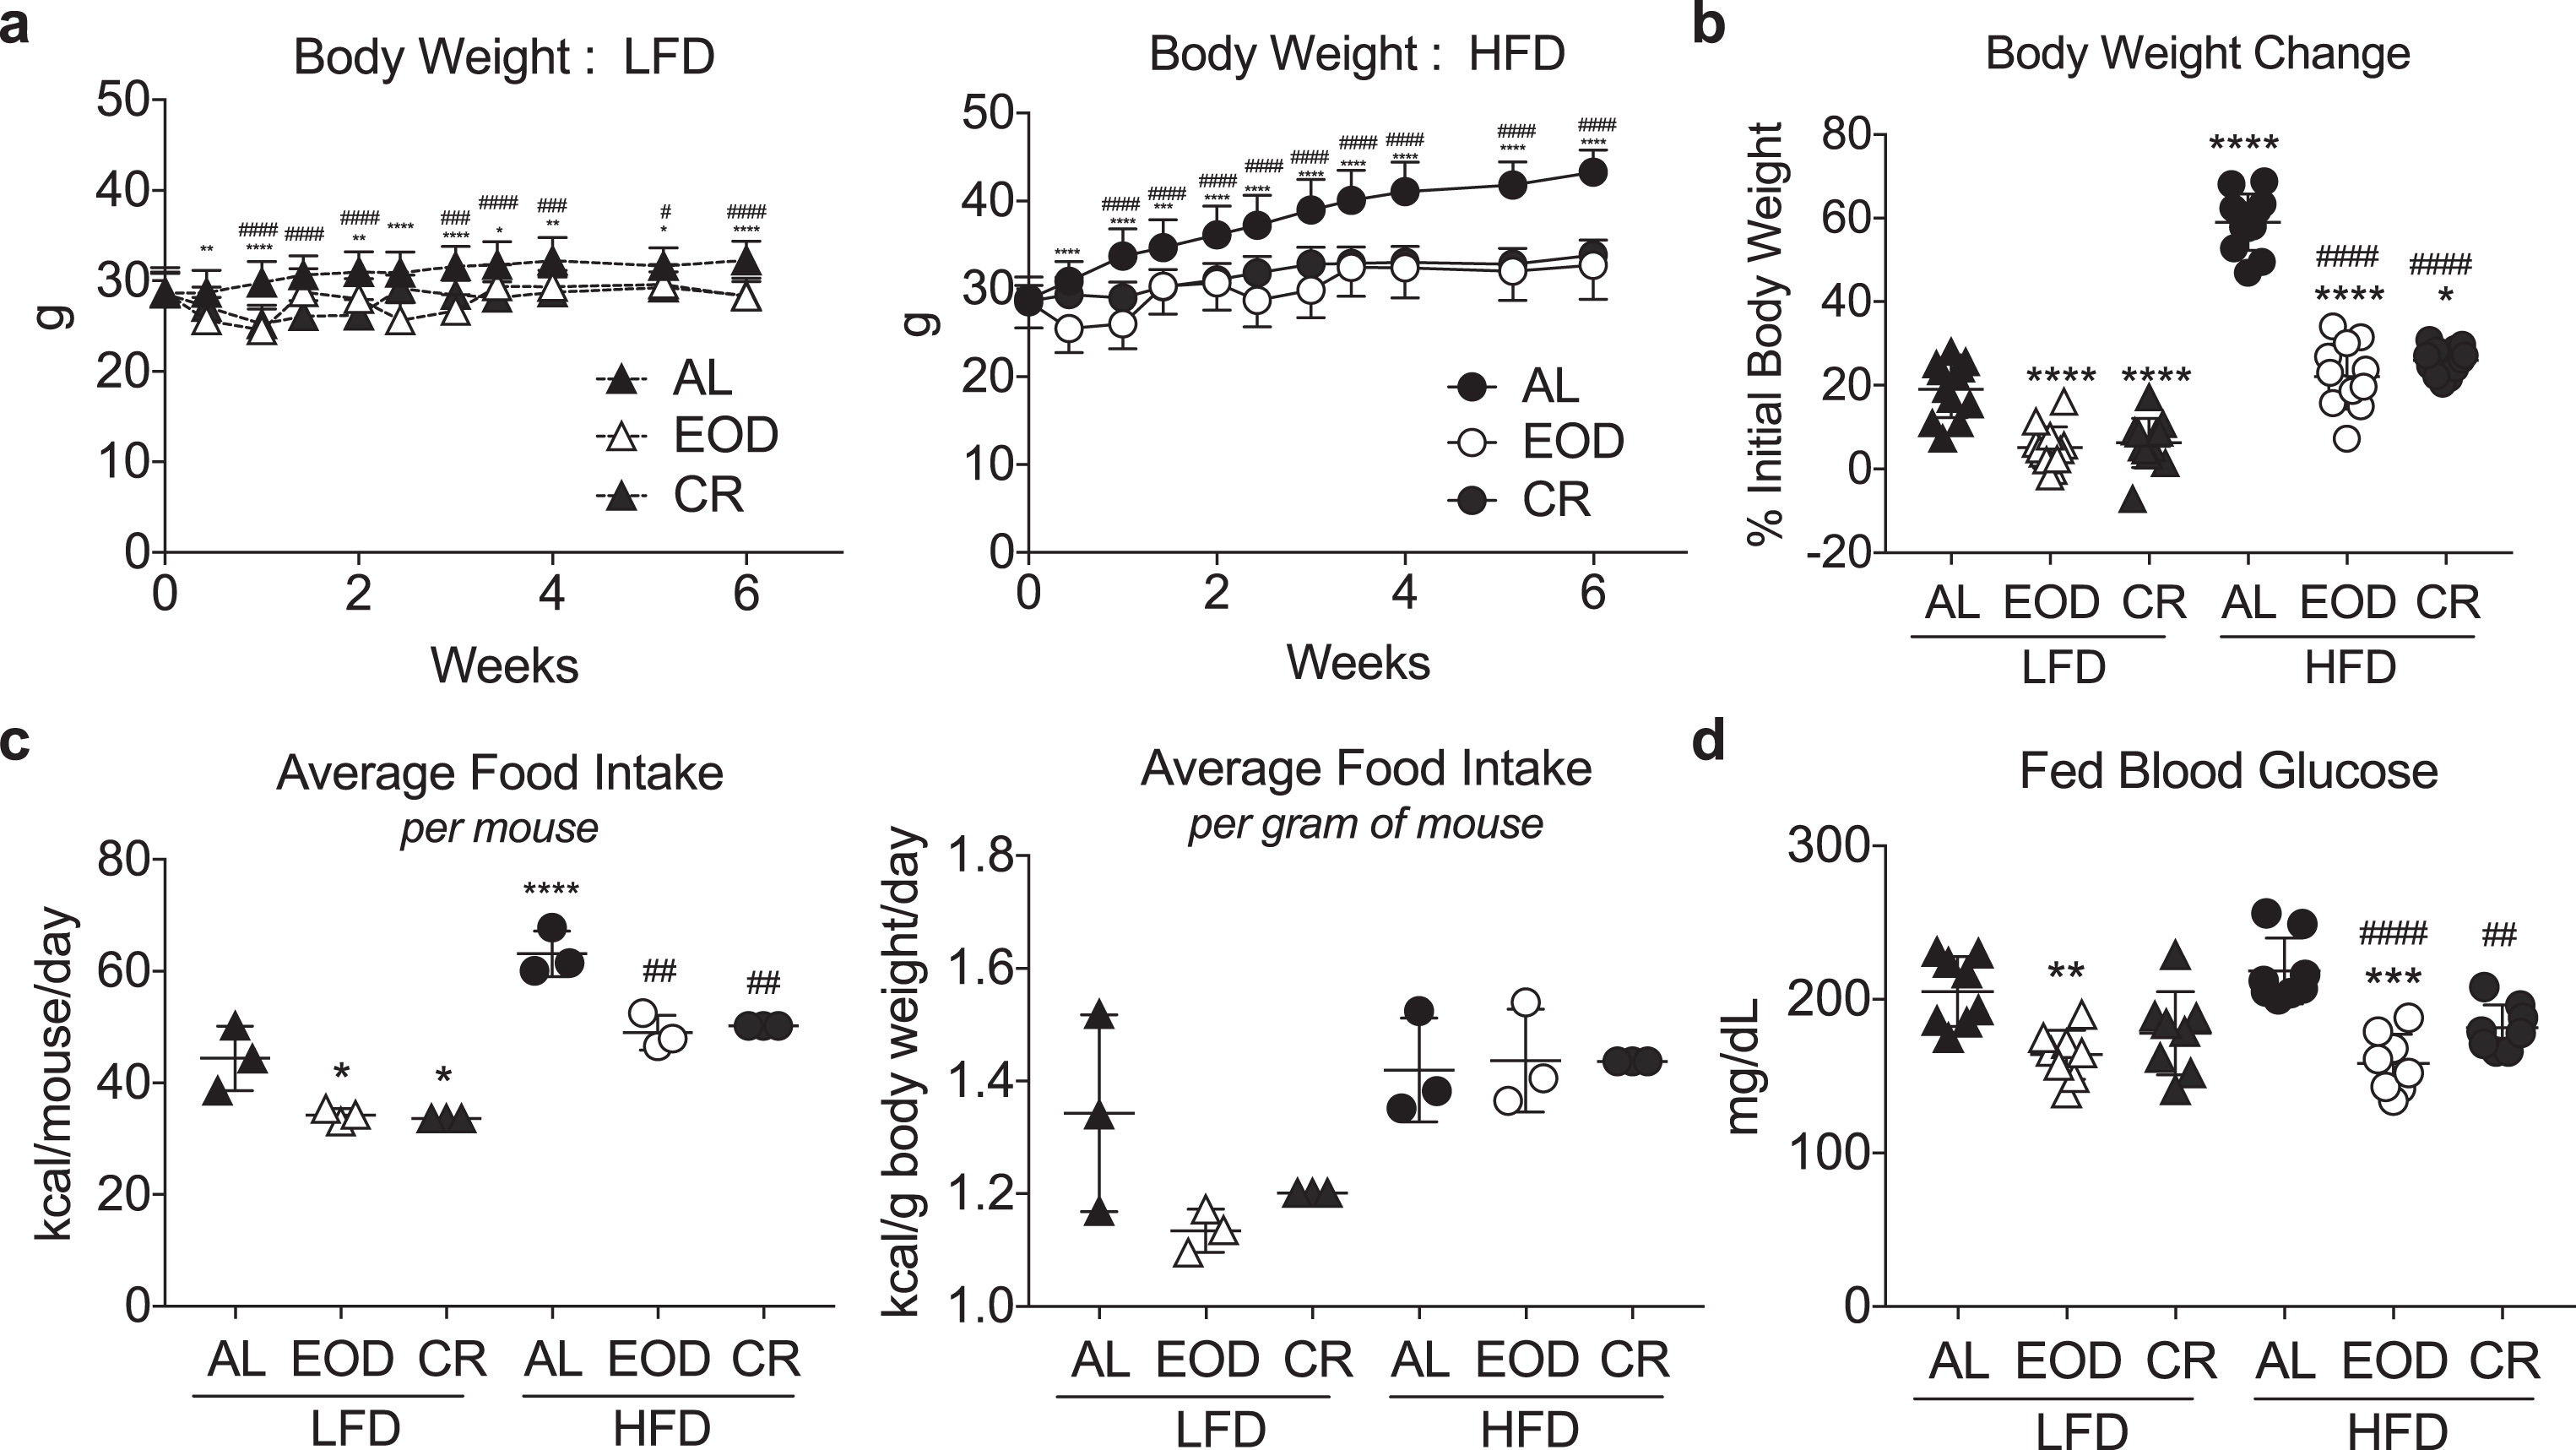 Modulation of body weight and blood glucose with different intermittent fasting regimens and diets. (a) Time-dependent changes in body weight over 6 weeks of the indicated dietary regimen (AL, EOD or CR) on LFD (left) or HFD (right). Asterisk: AL vs. EOD; pound sign: AL vs. CR within diet group using repeated measures two-way ANOVA with a Dunnett’s post-hoc test. (b) Final body weight expressed as a percent change of initial body weight. (c) Average food intake in kcal/mouse/day (left) or kcal/gram of mouse body weight/day over the course of 6 weeks of dietary intervention. Each symbol represents a separate cage of 4 animals. (d) Fed blood glucose levels following 6 weeks on the indicated diet, and after a fed day in the EOD groups. (b-d) Asterisk: comparison of all groups to AL LFD; pound sign: comparison of HFD groups to AL HFD using one-way ANOVA with a Sidak’s post-hoc test; */#P < 0.05, **/# #P < 0.01, ***/# # #P < 0.001, ****/# # # #P < 0.0001. All data are expressed as mean±SD.